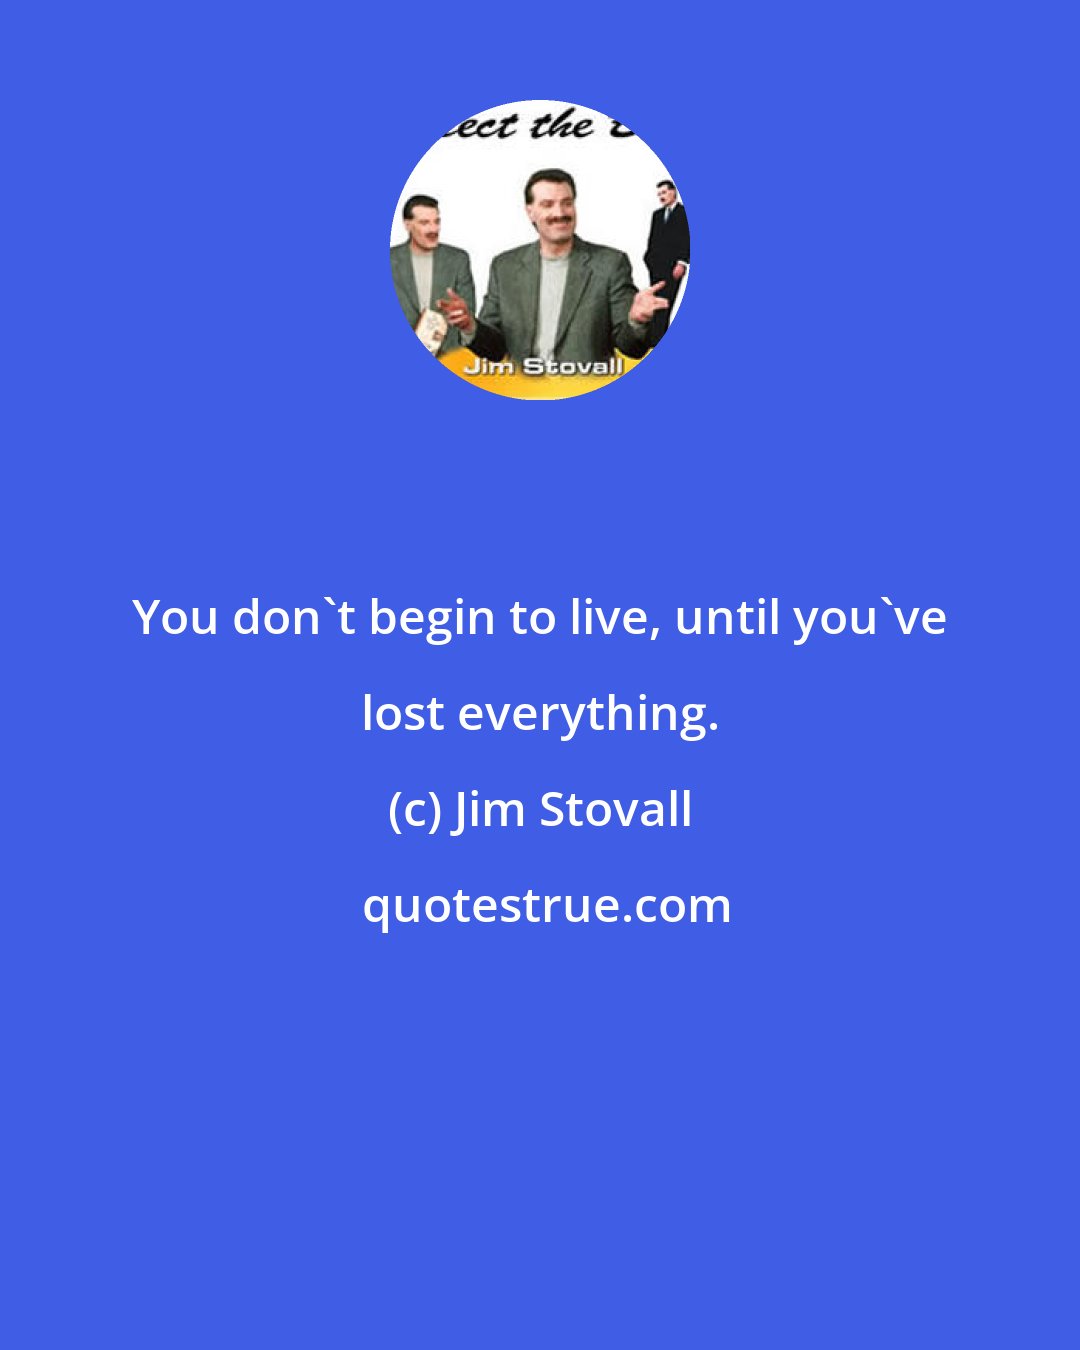 Jim Stovall: You don't begin to live, until you've lost everything.